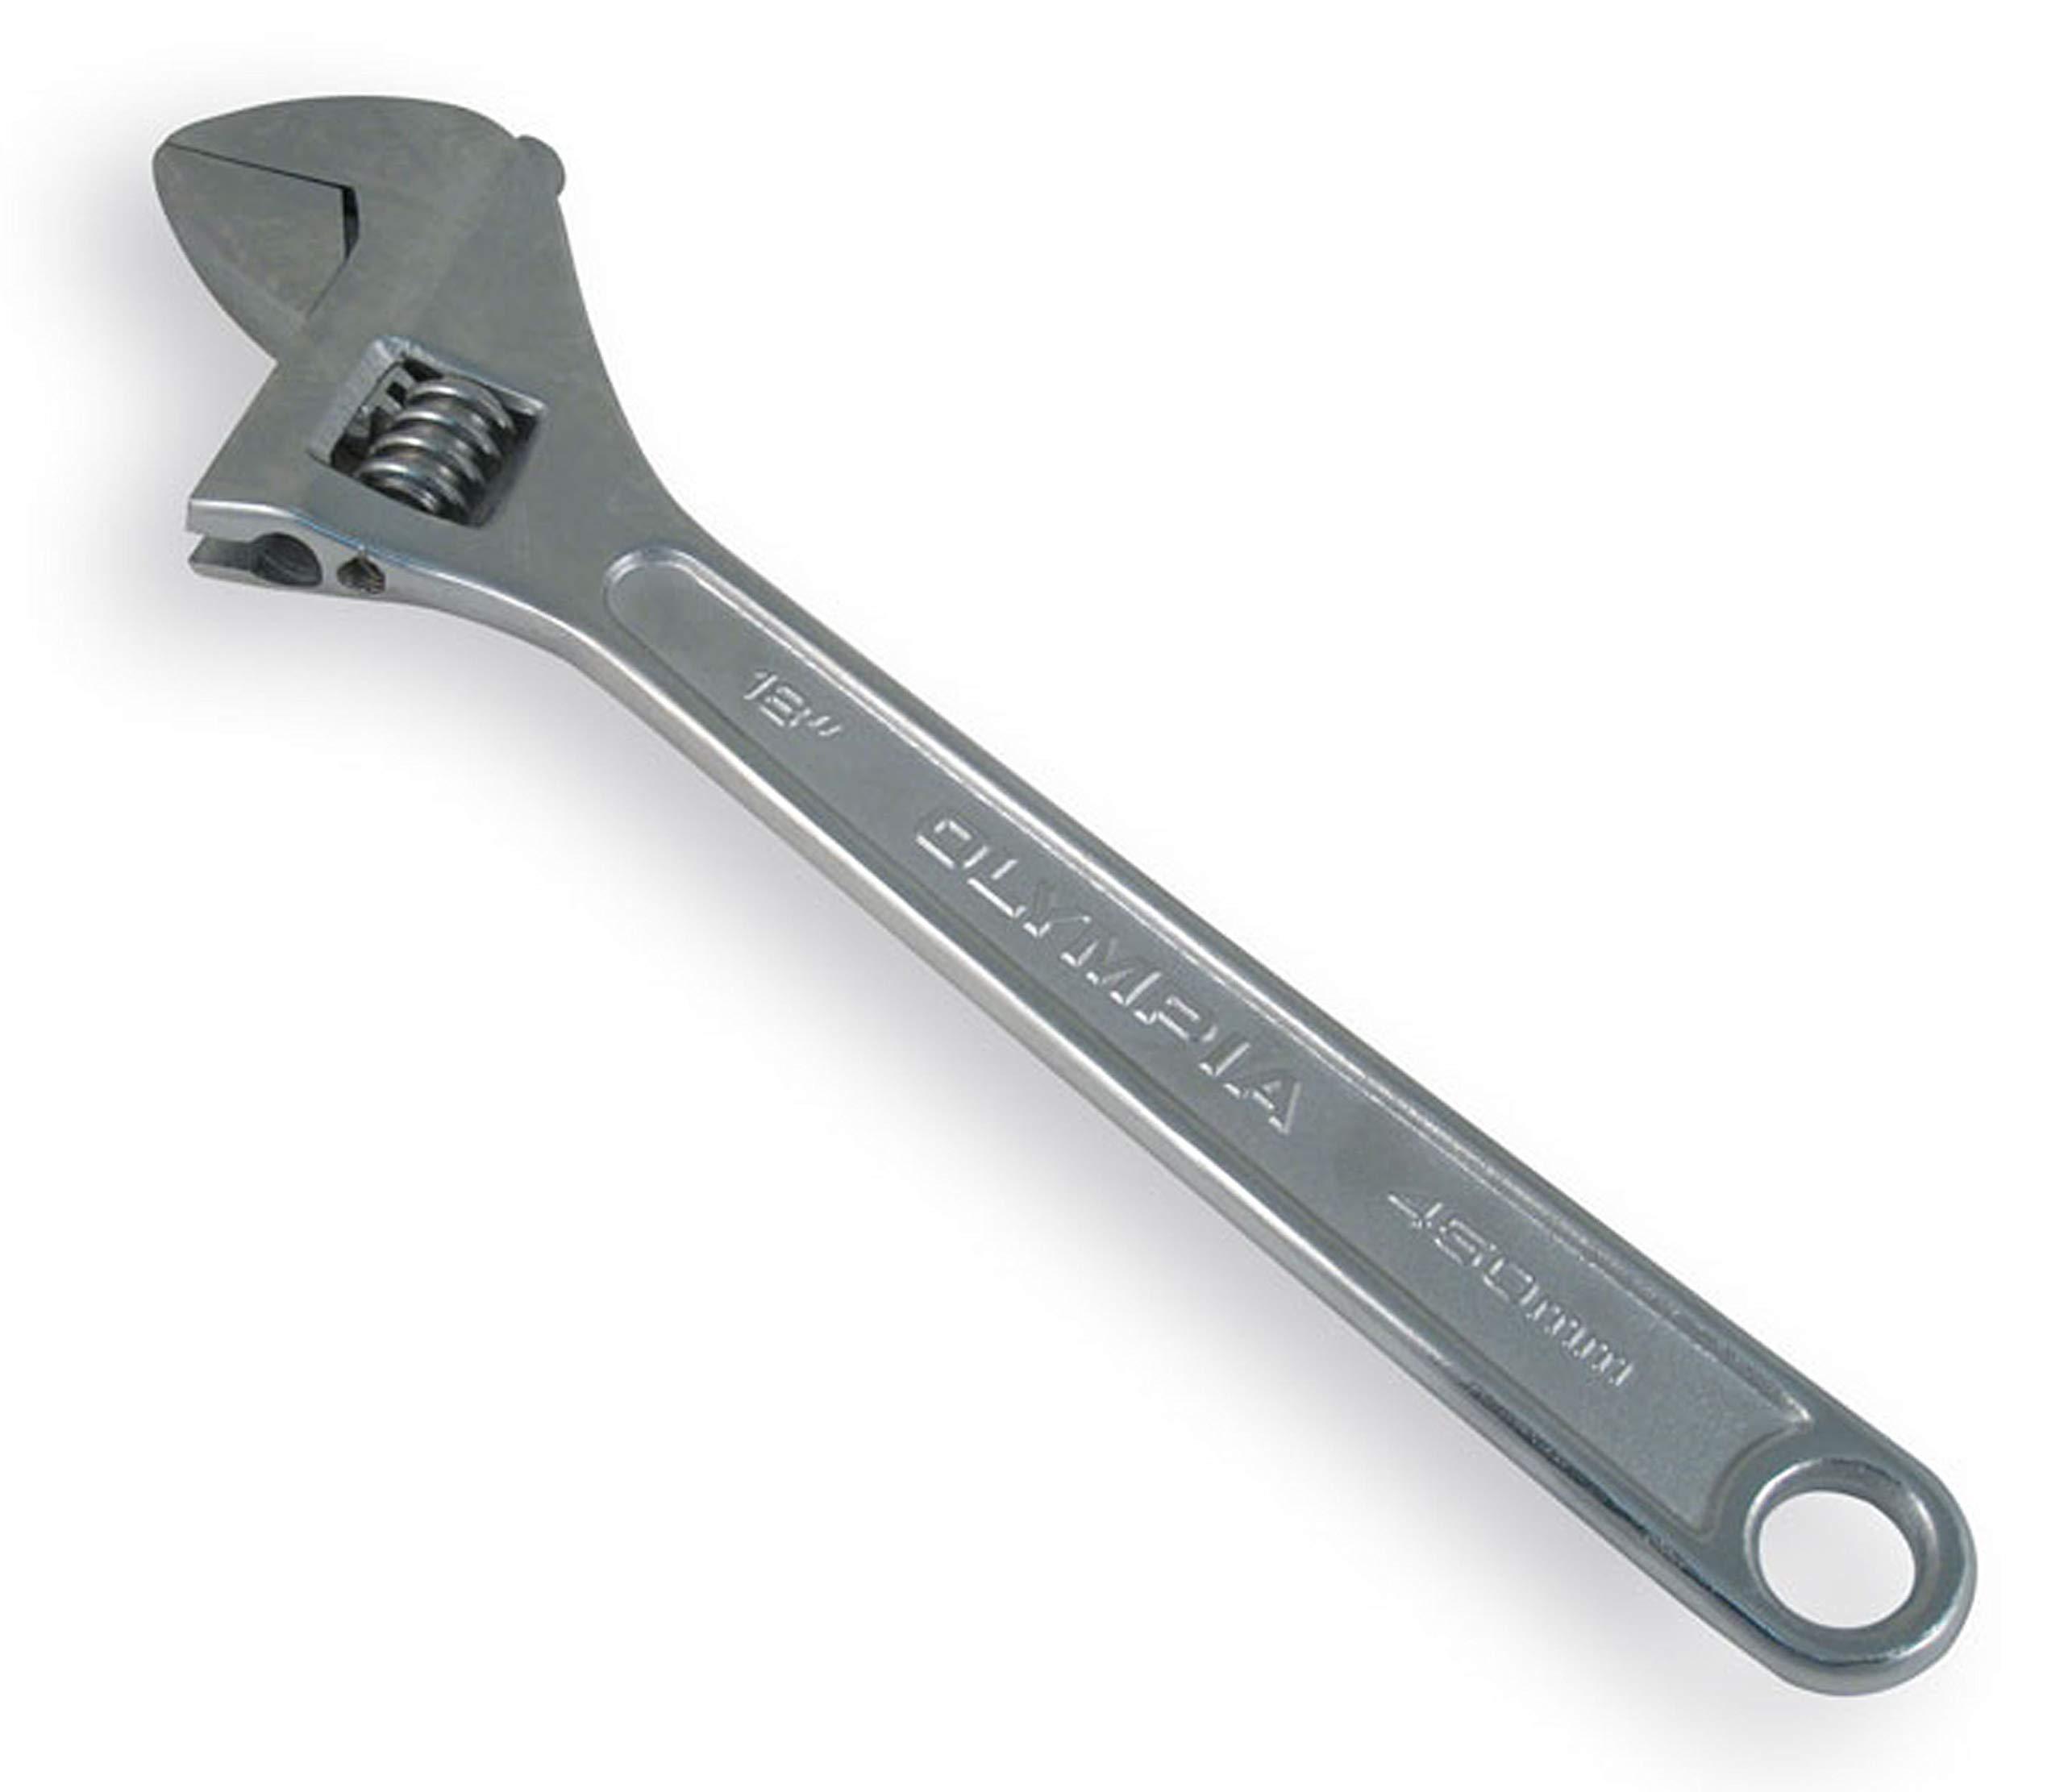 olympia tools adjustable wrench 01-018, 18 inches, silver